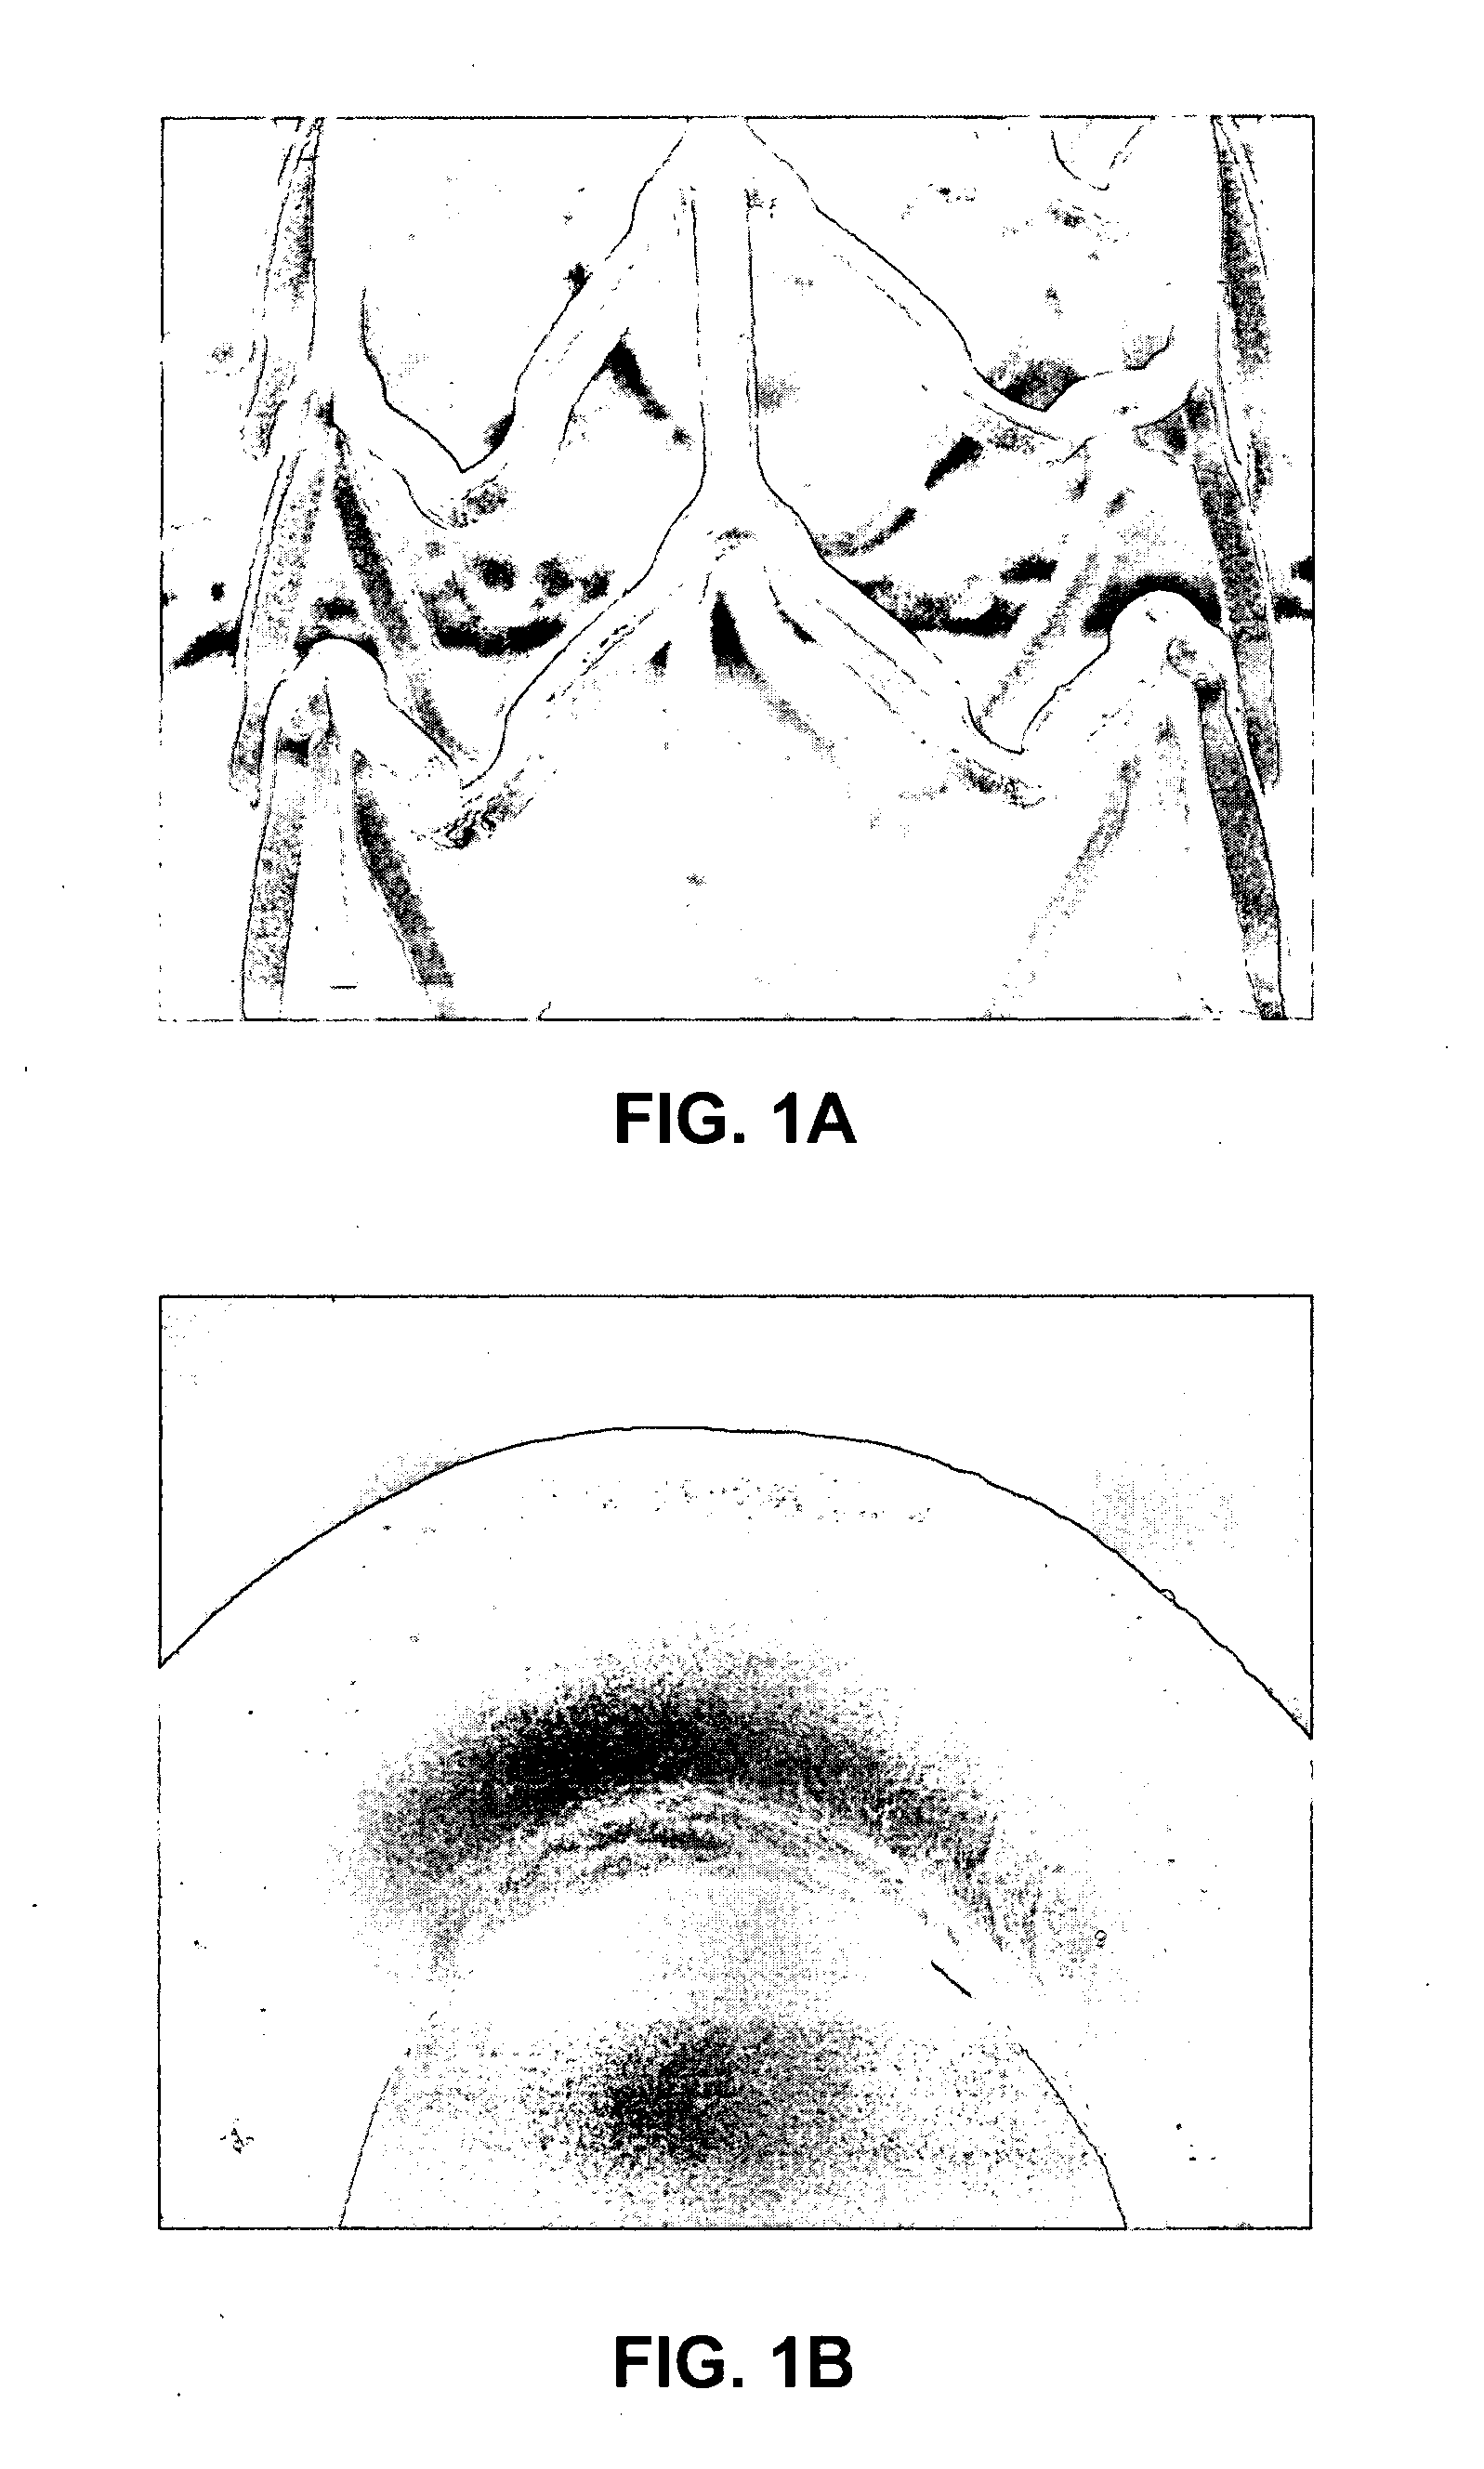 Coatings for implantable medical devices comprising hydrophilic substances and methods for fabricating the same